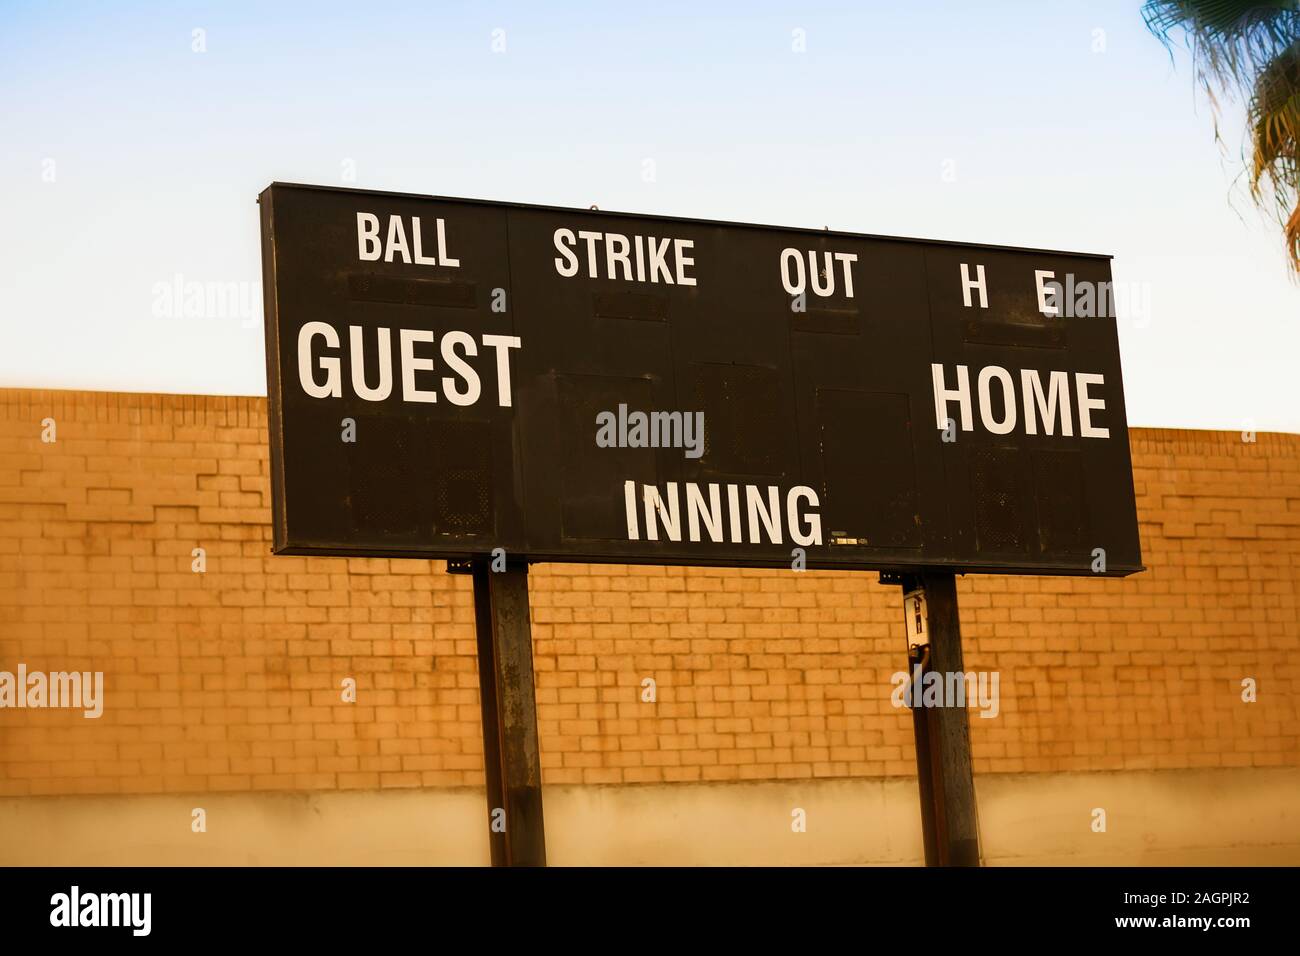 An old fashioned baseball or softball scoreboard without any scores to display. Stock Photo